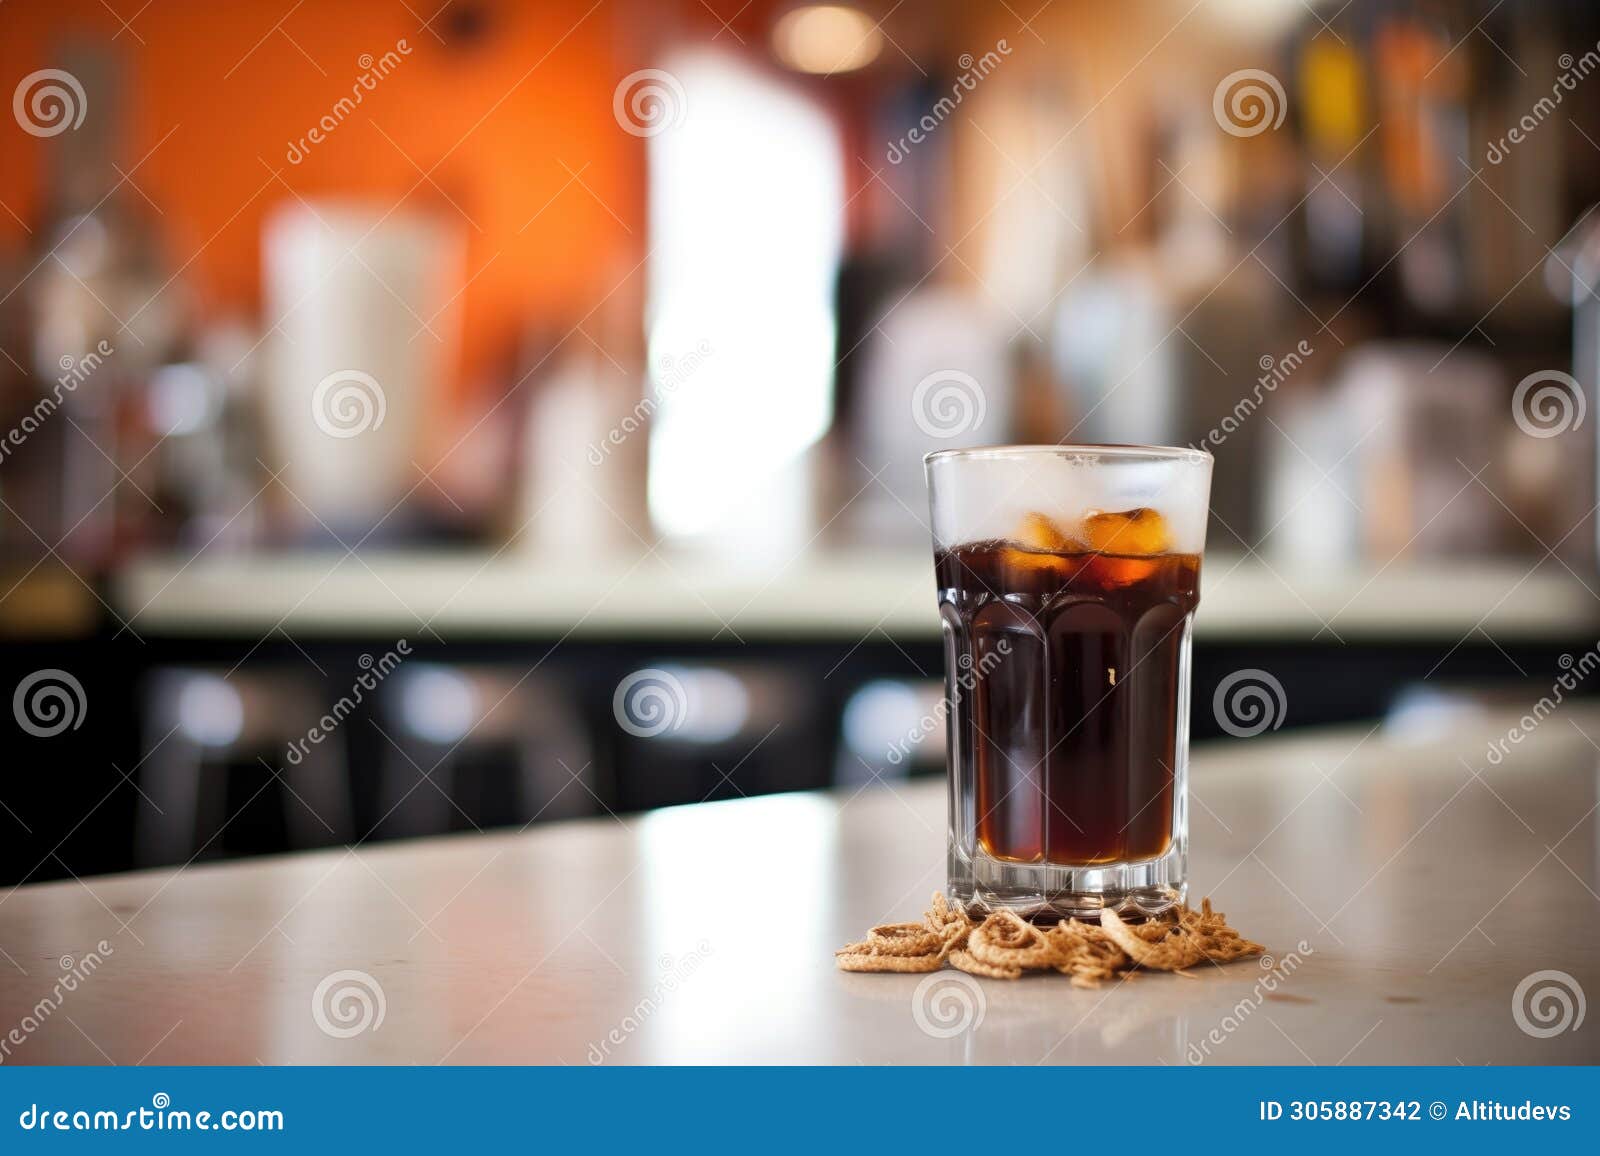 root beer in an oldfashioned soda shop glass